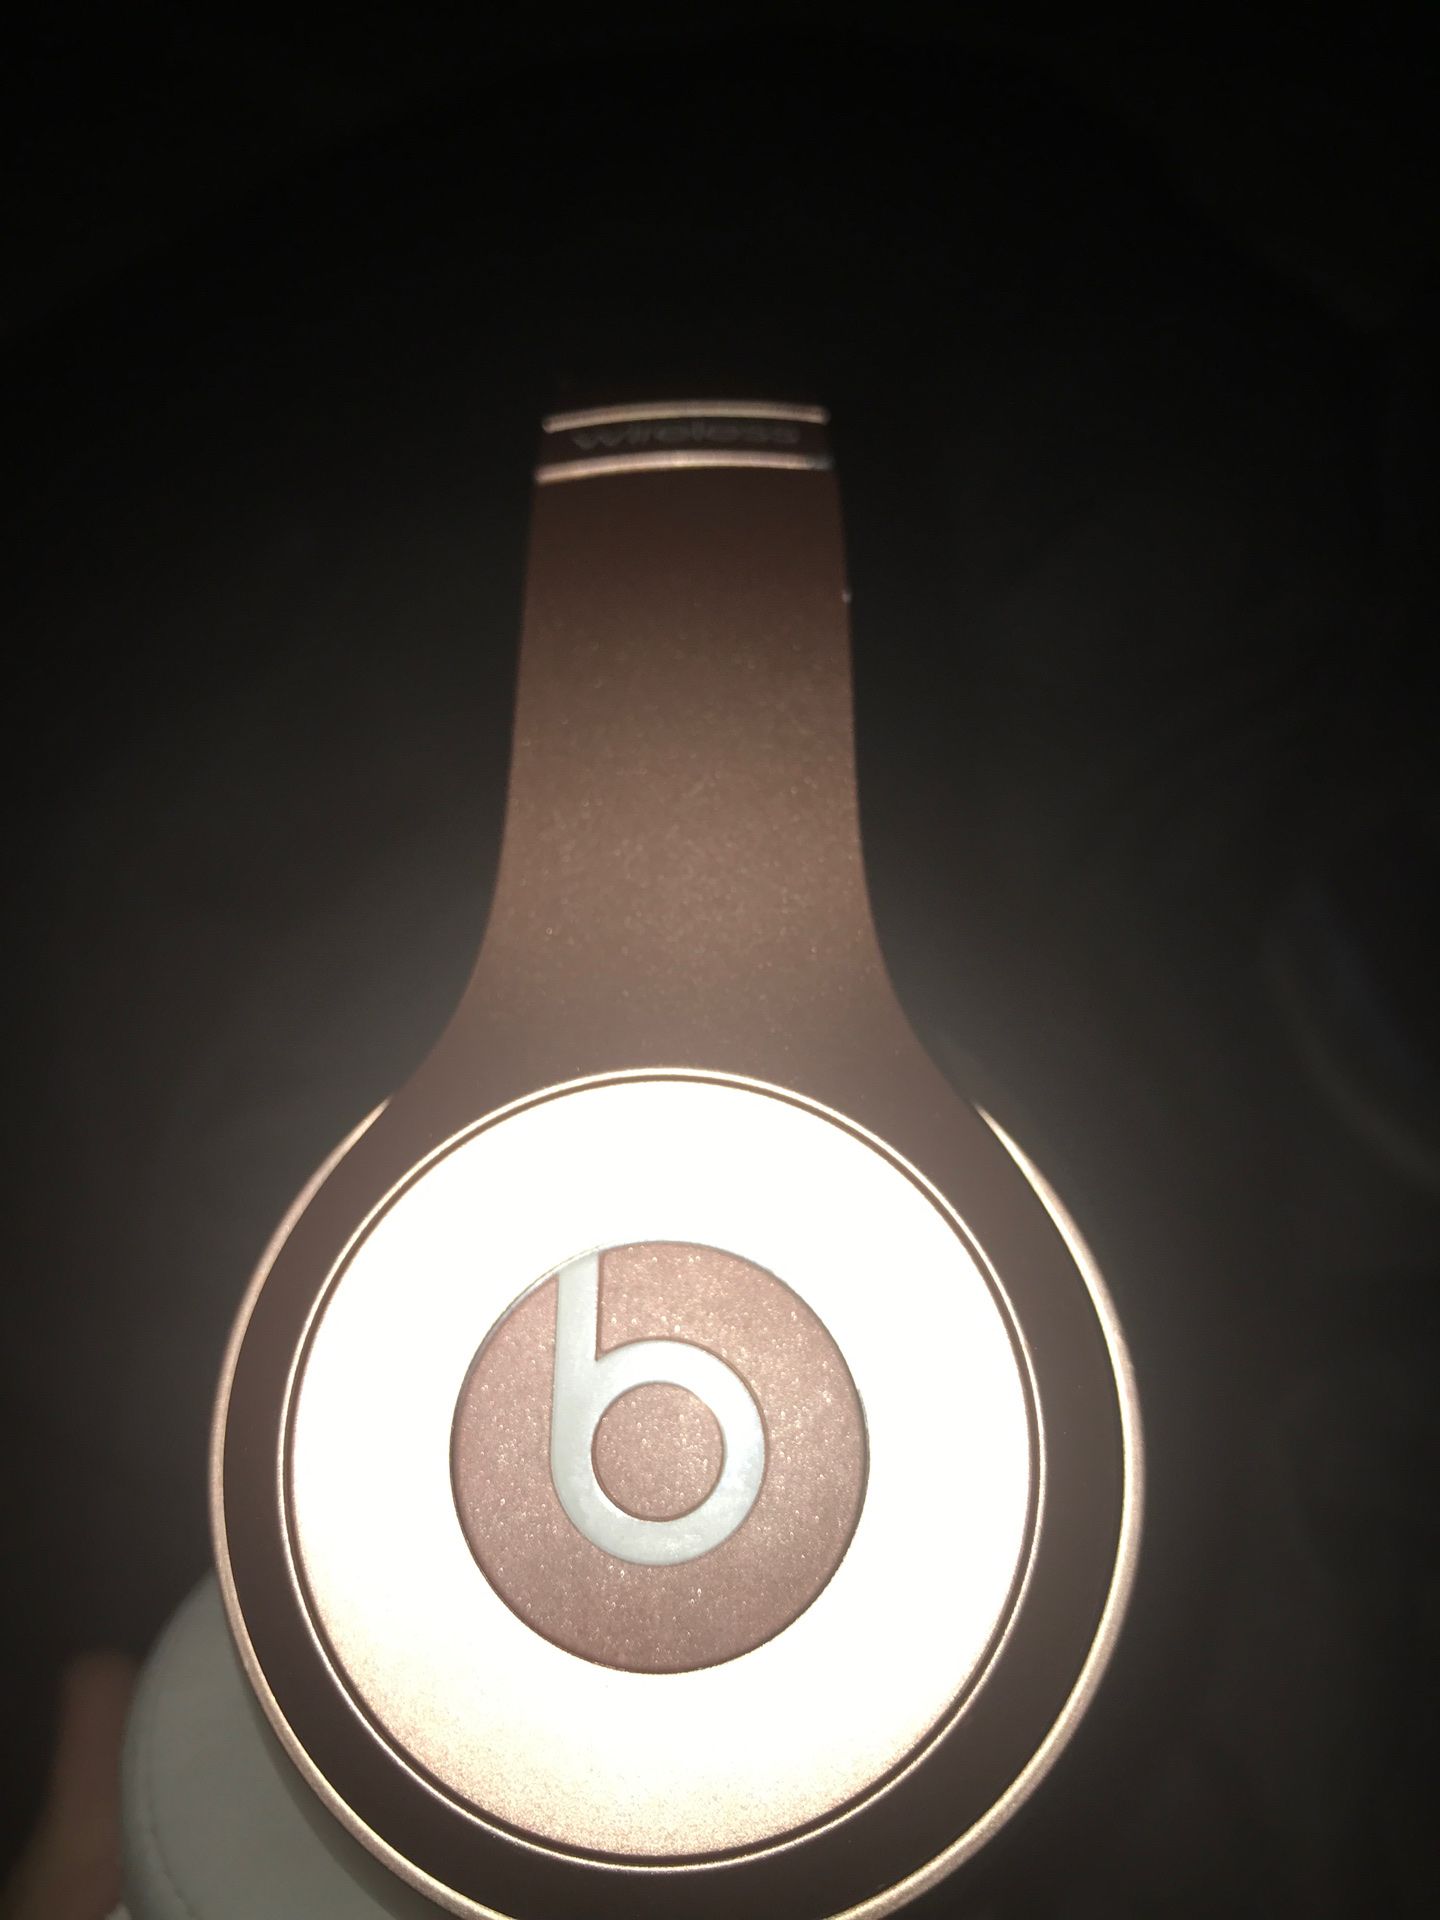 Rose gold beats solo 2